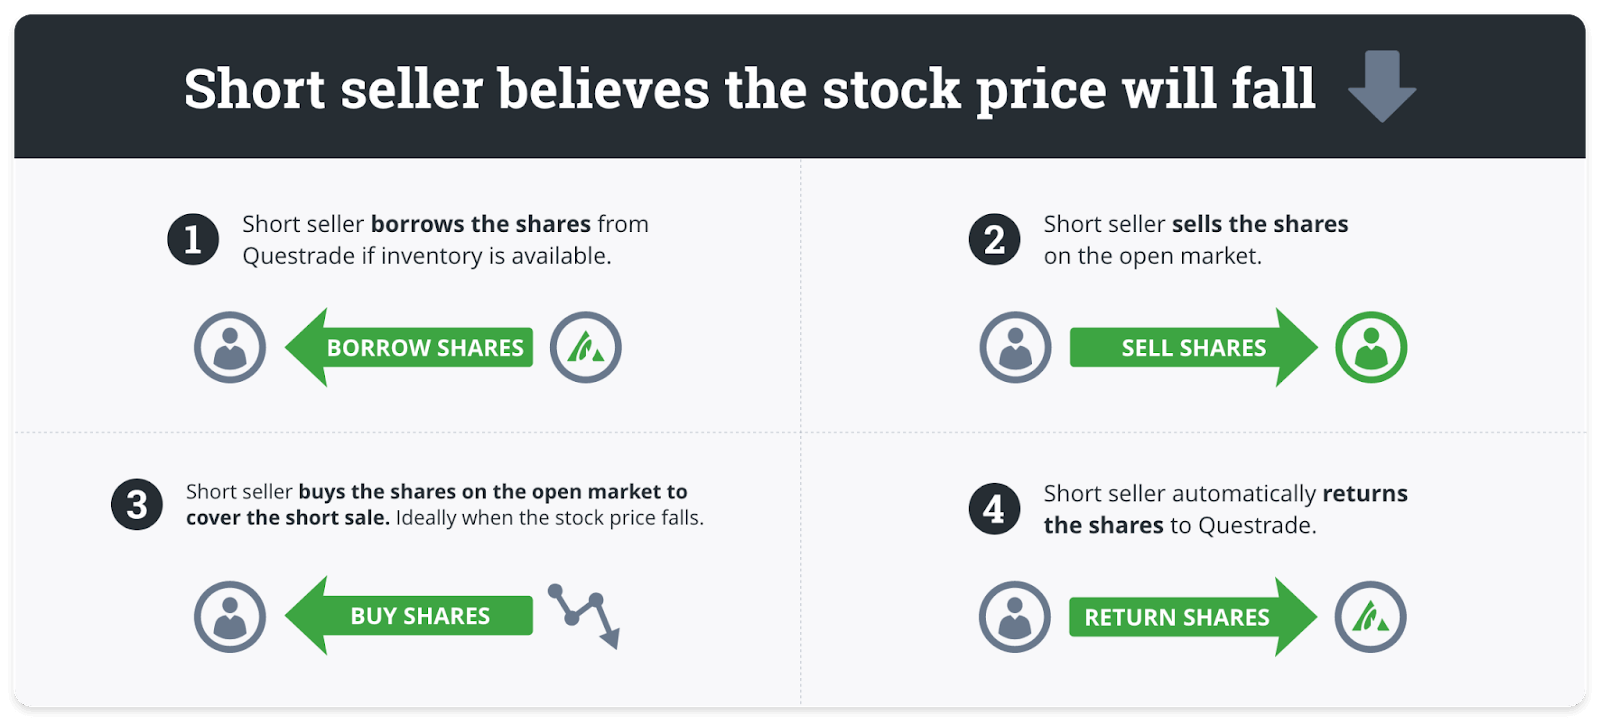 short seller believes stock price will fall infographic